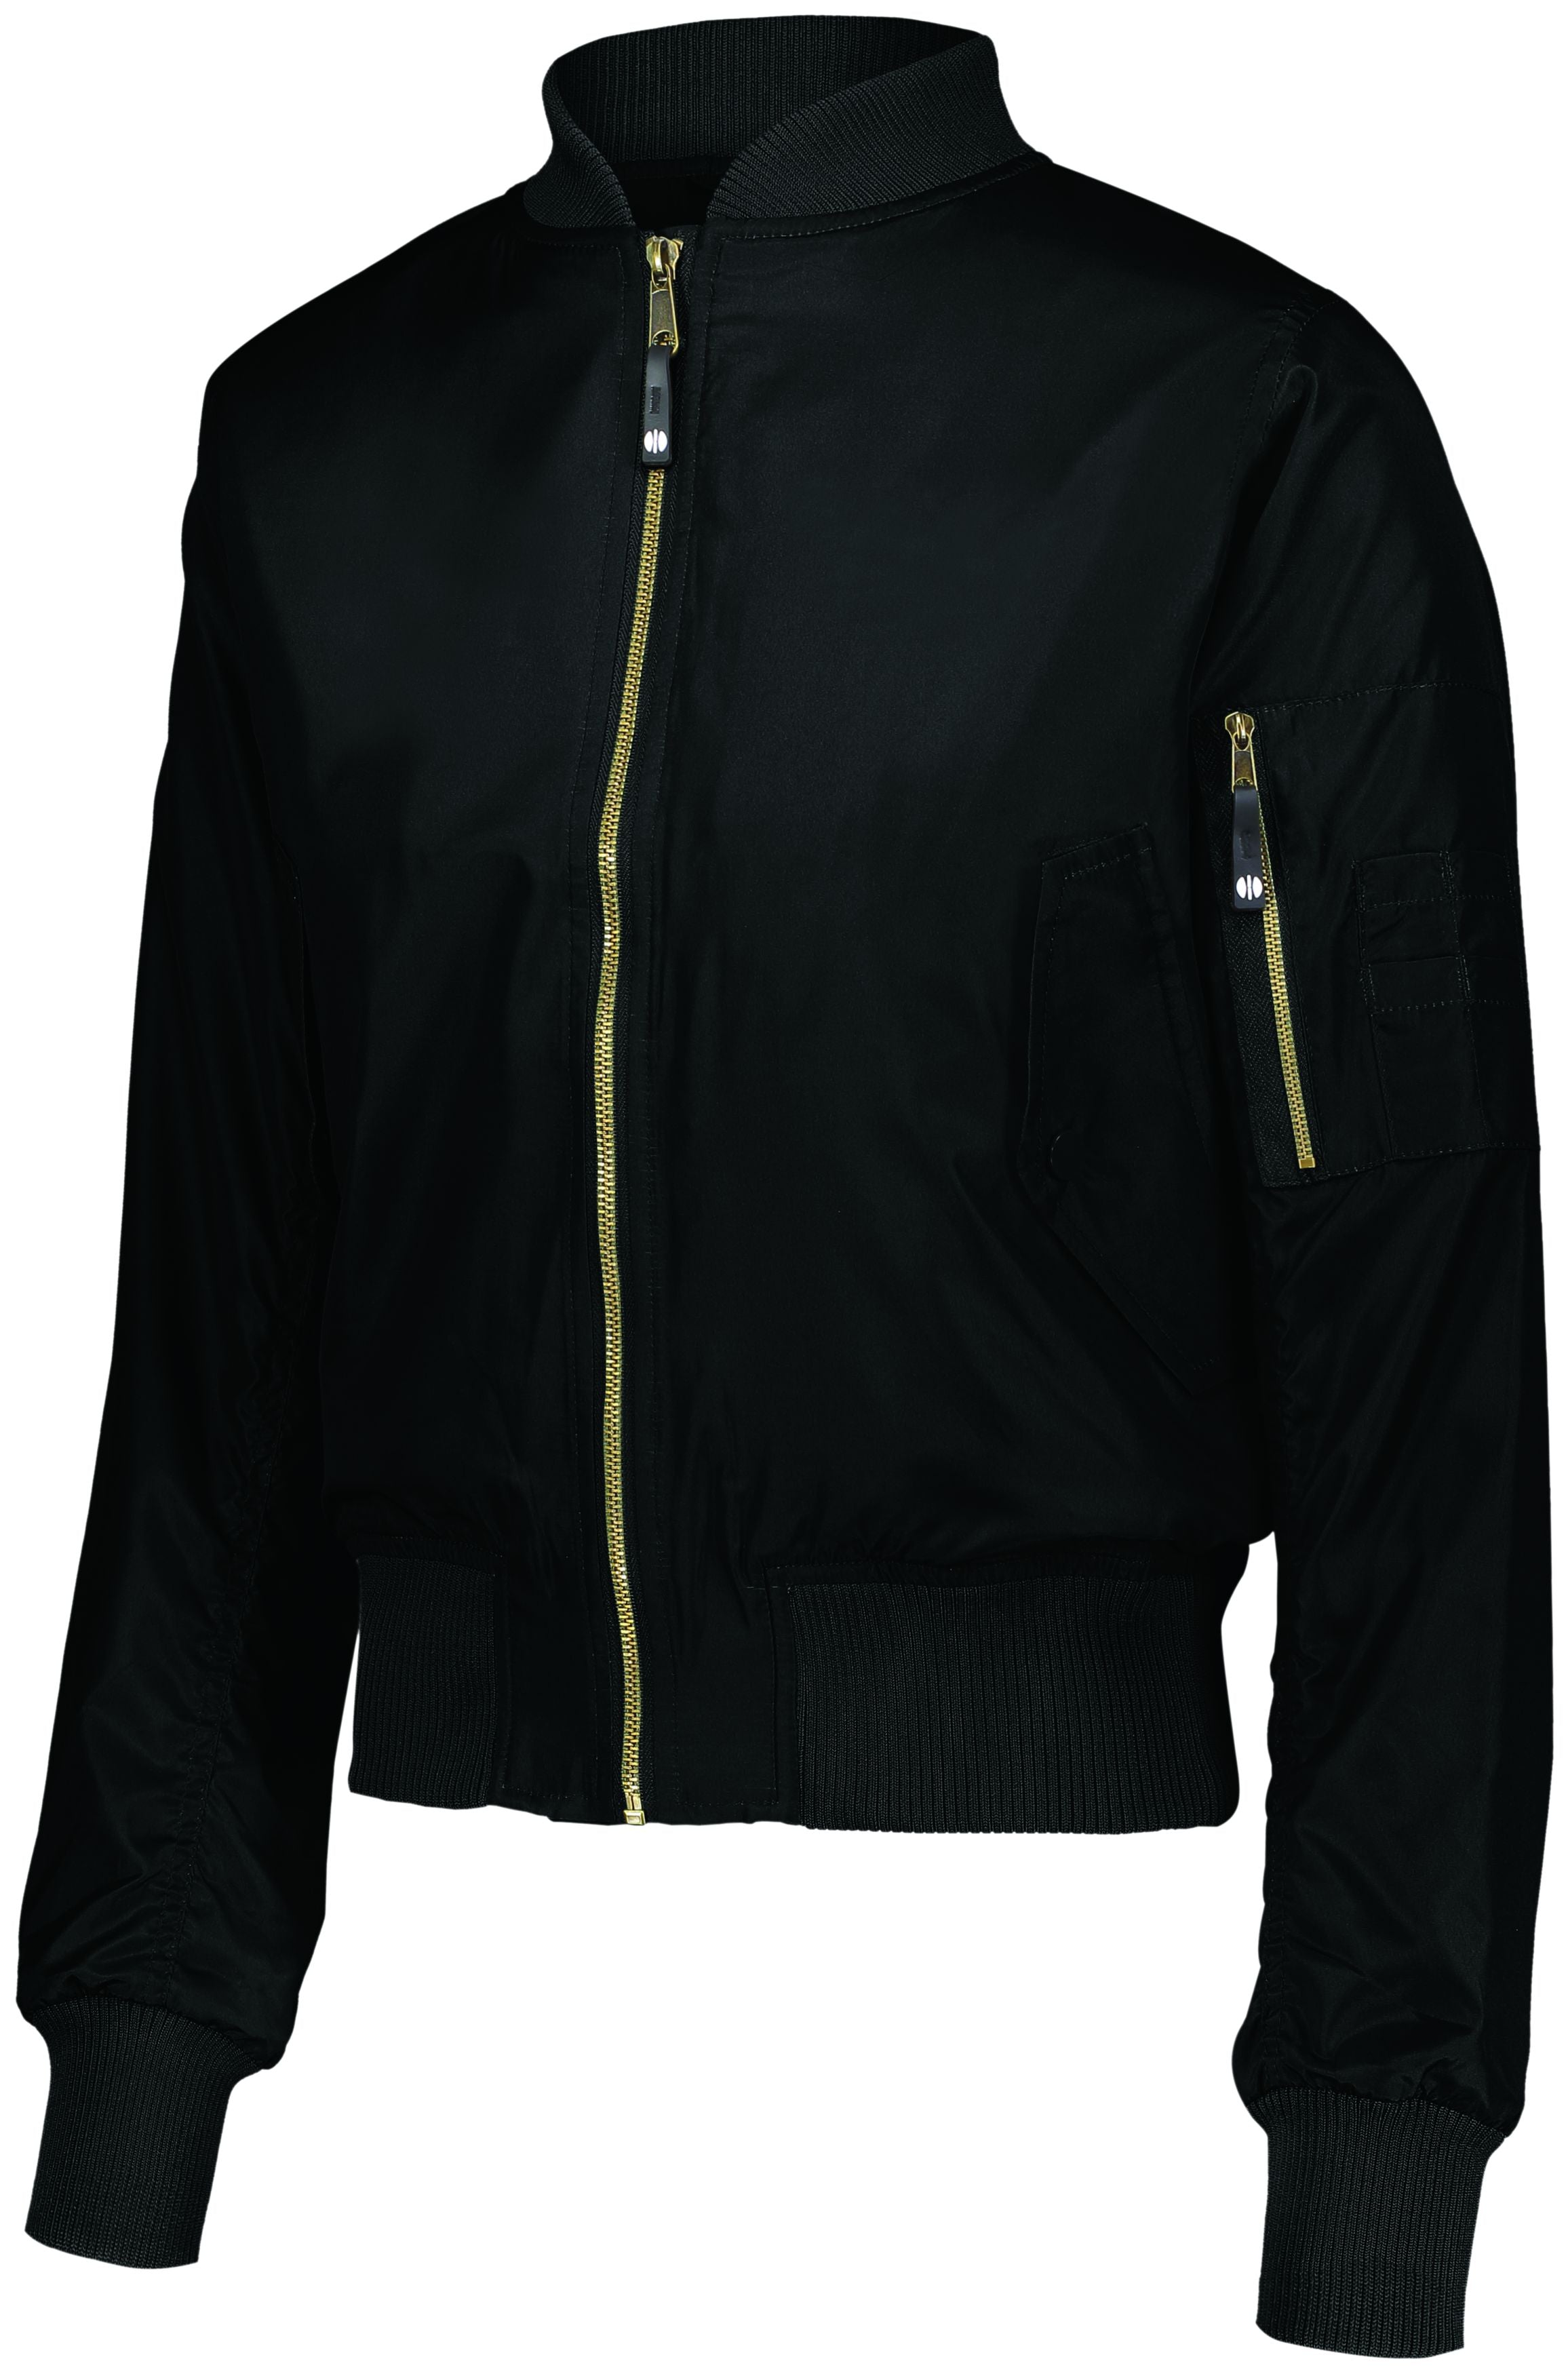 Holloway Ladies Flight Bomber Jacket in Black  -Part of the Ladies, Ladies-Jacket, Holloway, Outerwear product lines at KanaleyCreations.com